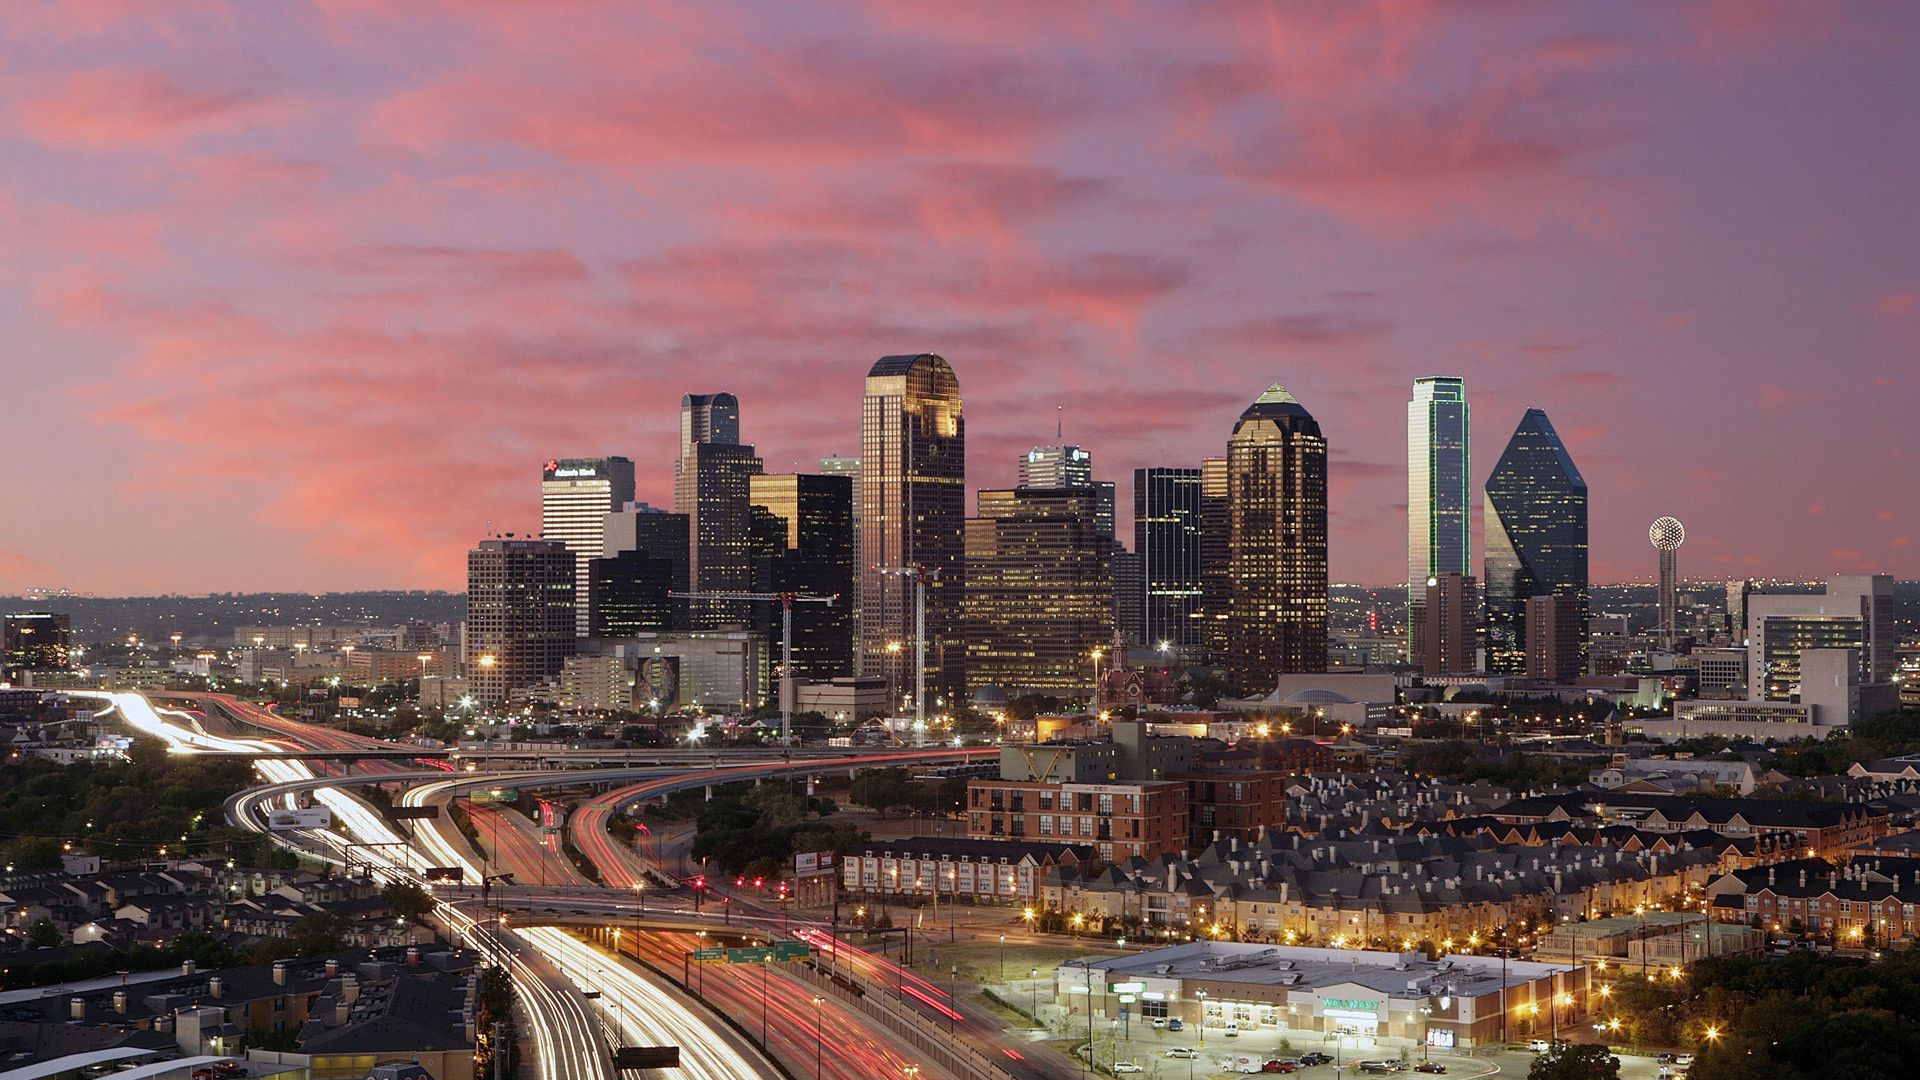 Sunset view of the downtown Dallas Skyline